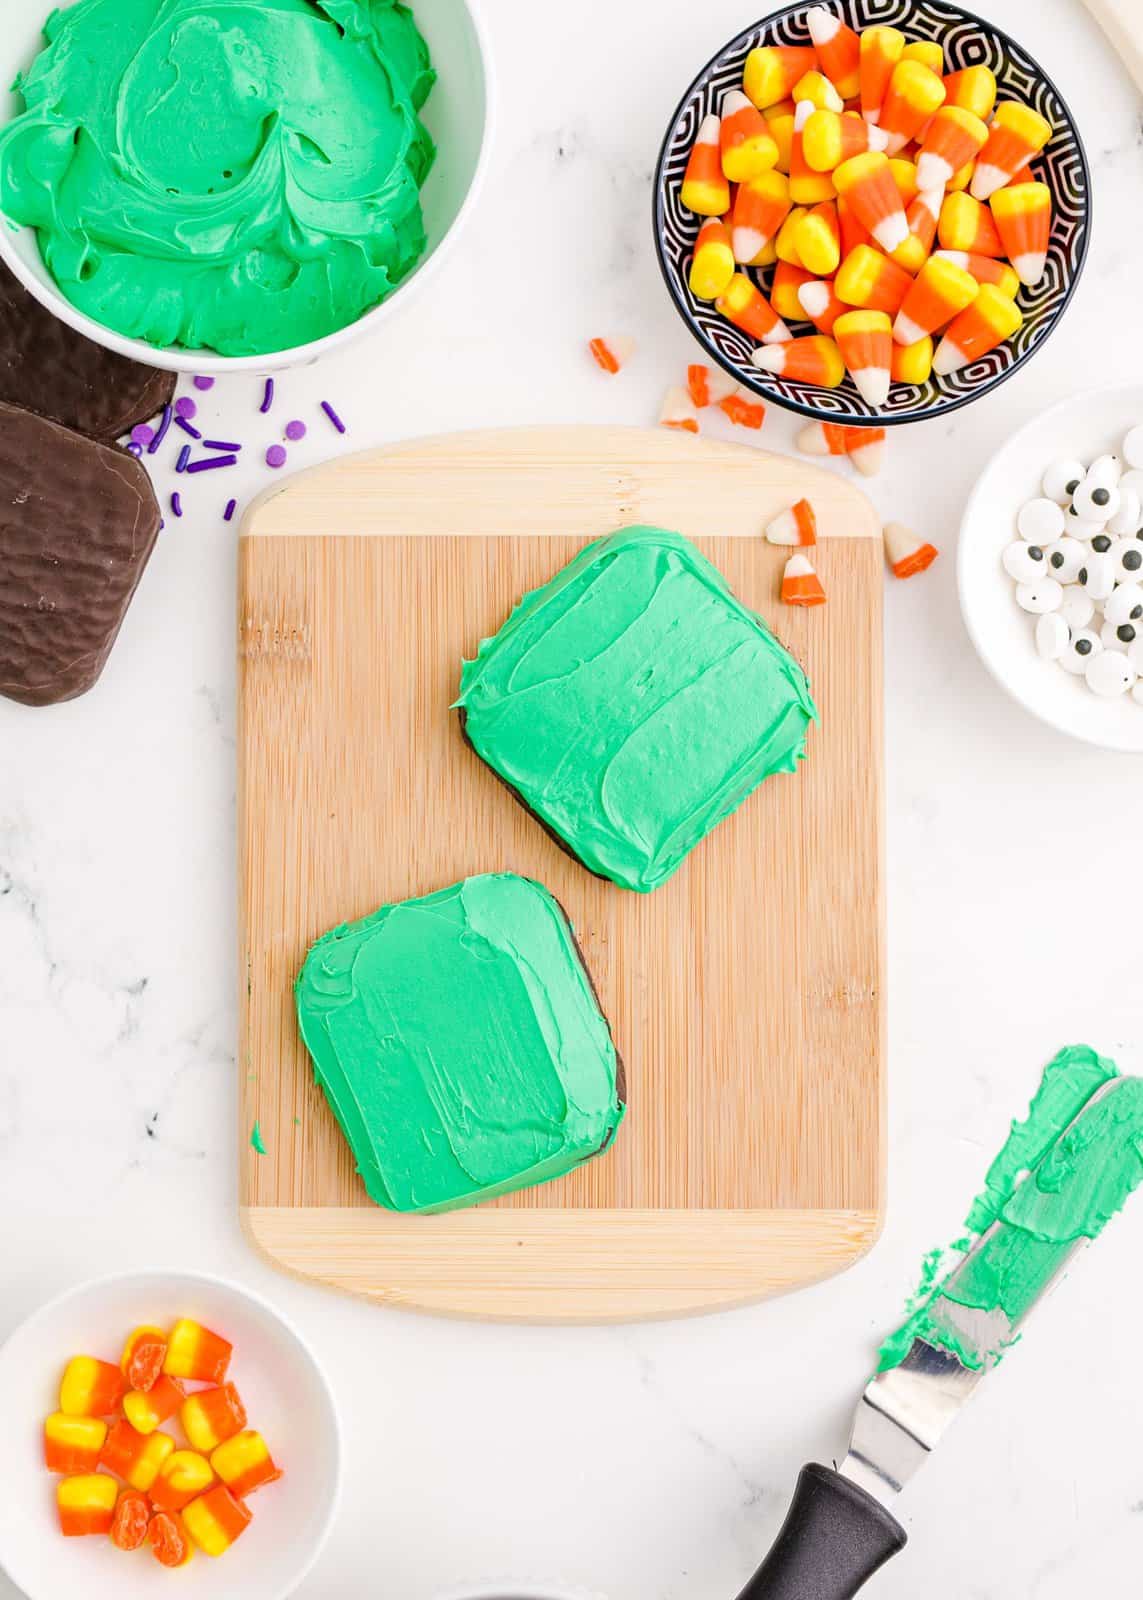 Green frosting spread over cookies.